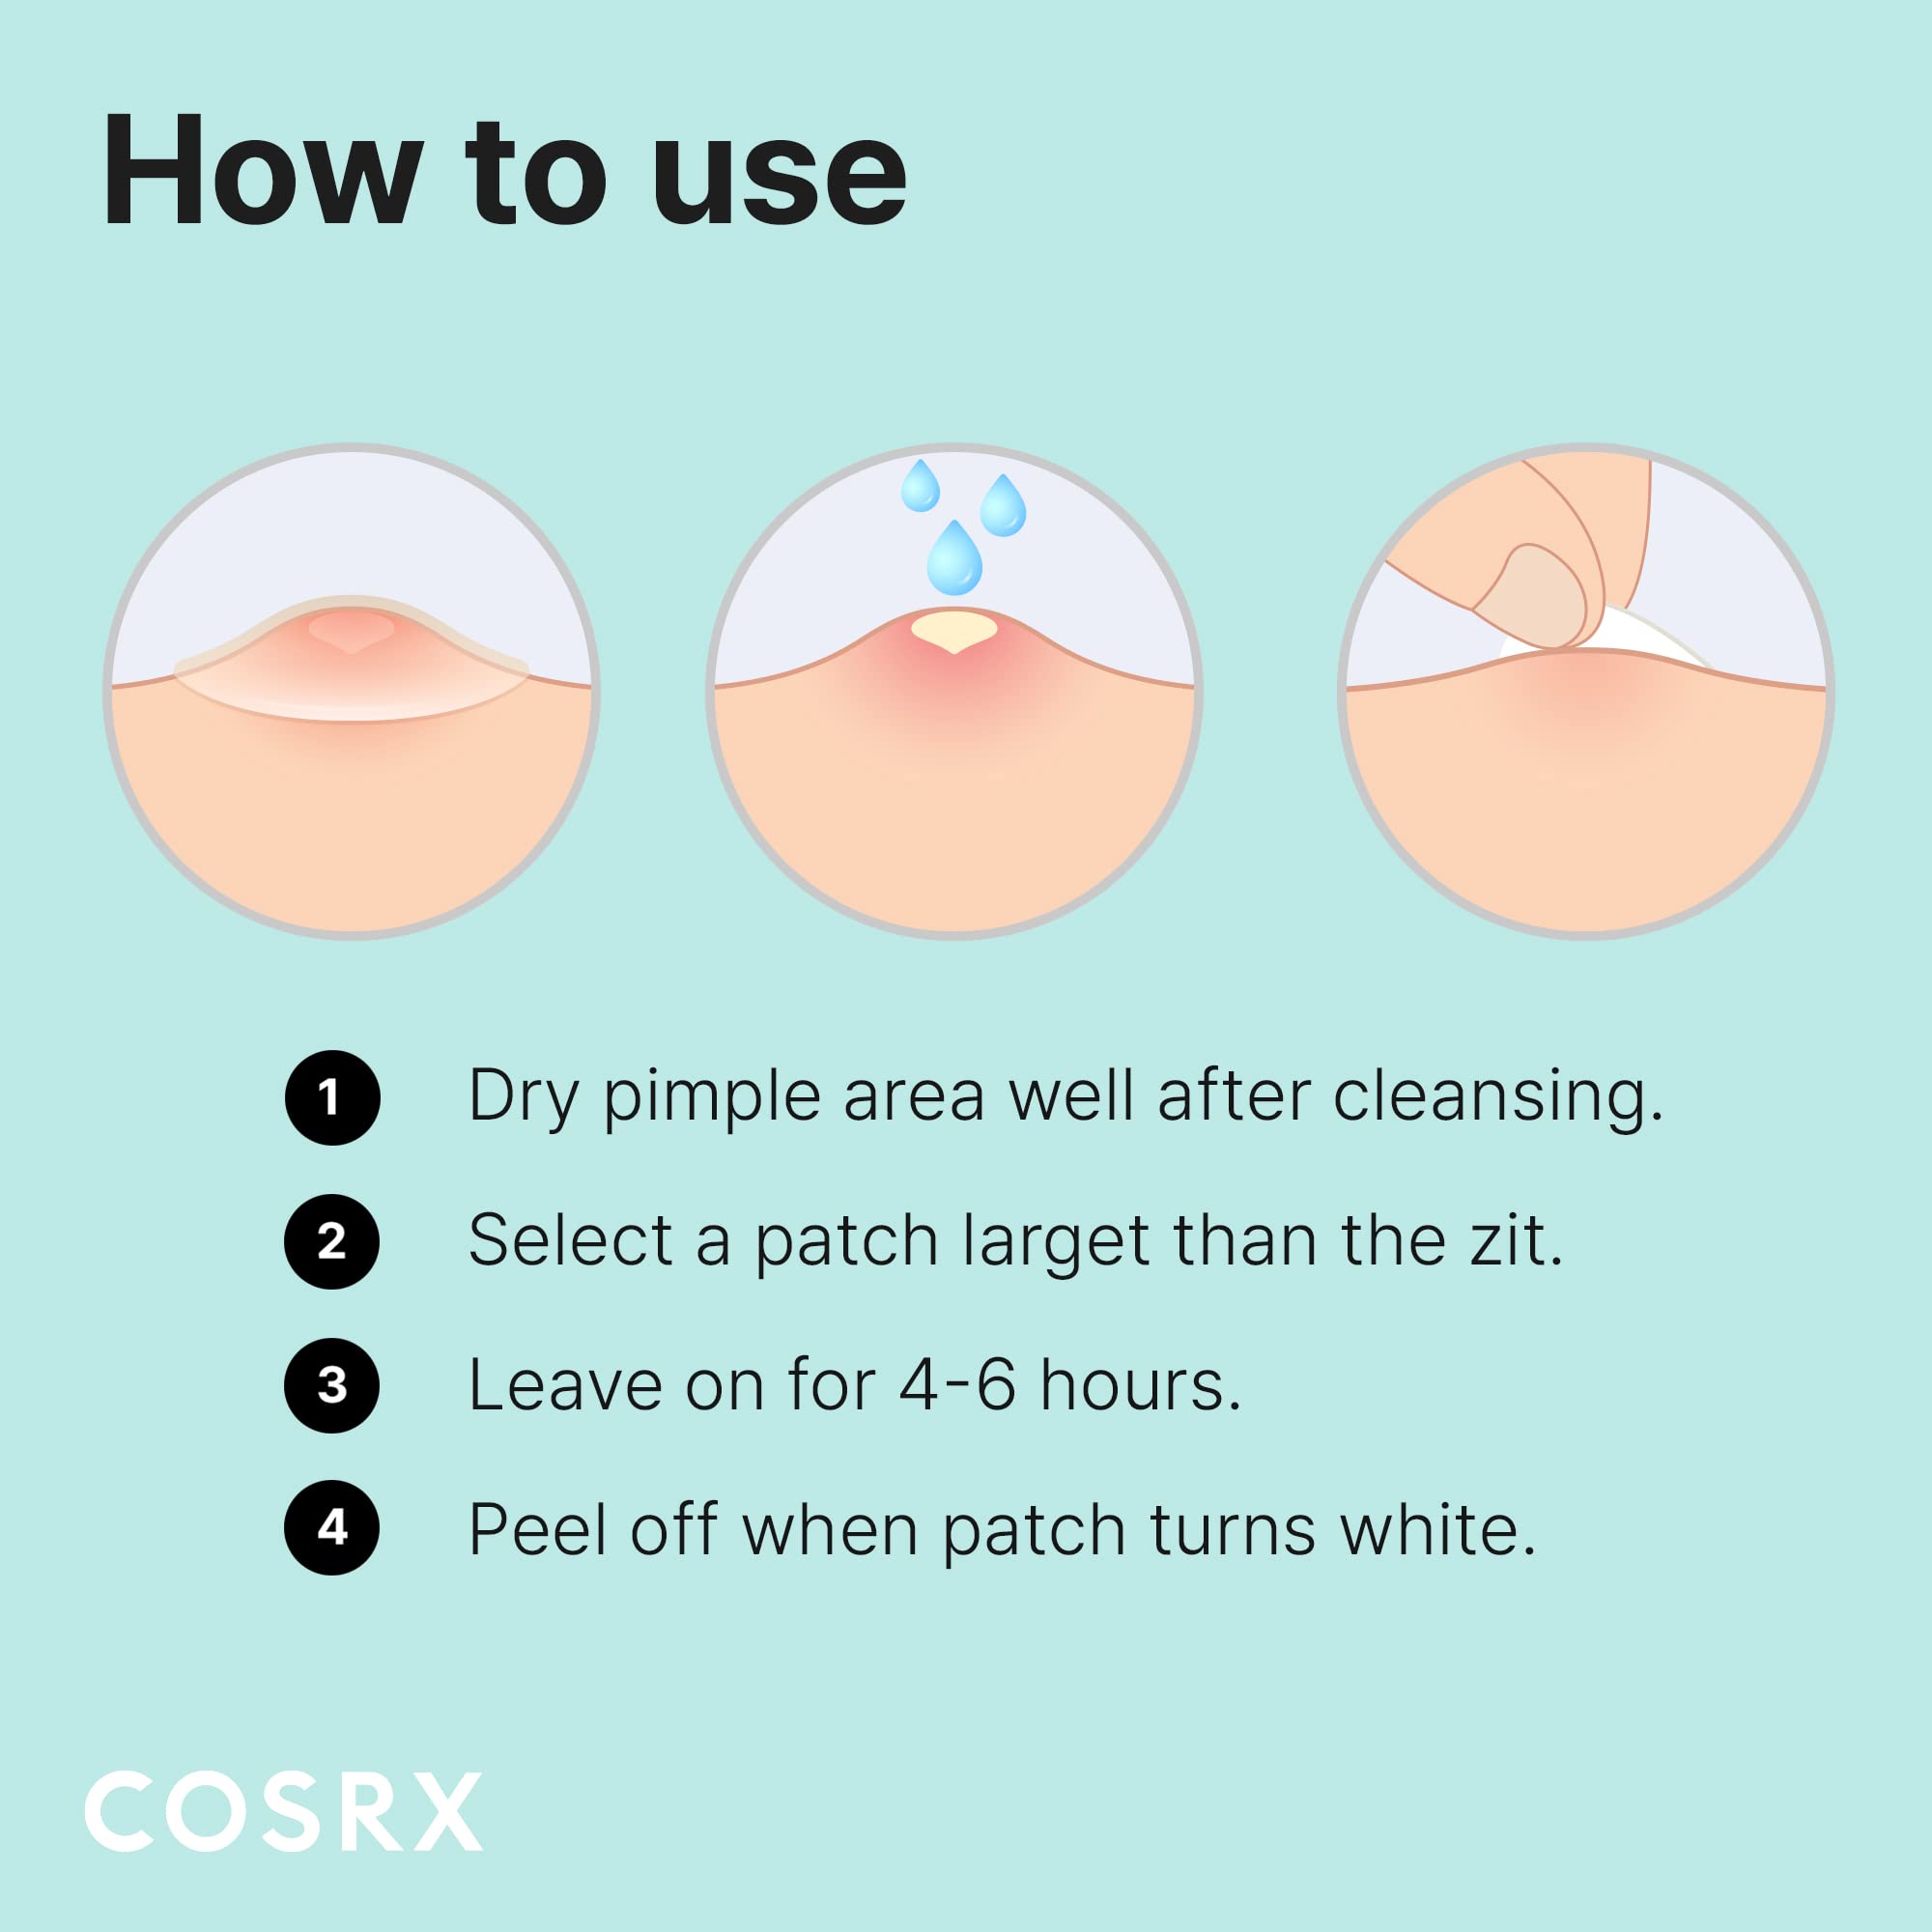 COSRX Acne Pimple Patch (96 Count) Absorbing Hydrocolloid Spot Treatment Fast Healing, Blemish Cover, Three Sizes